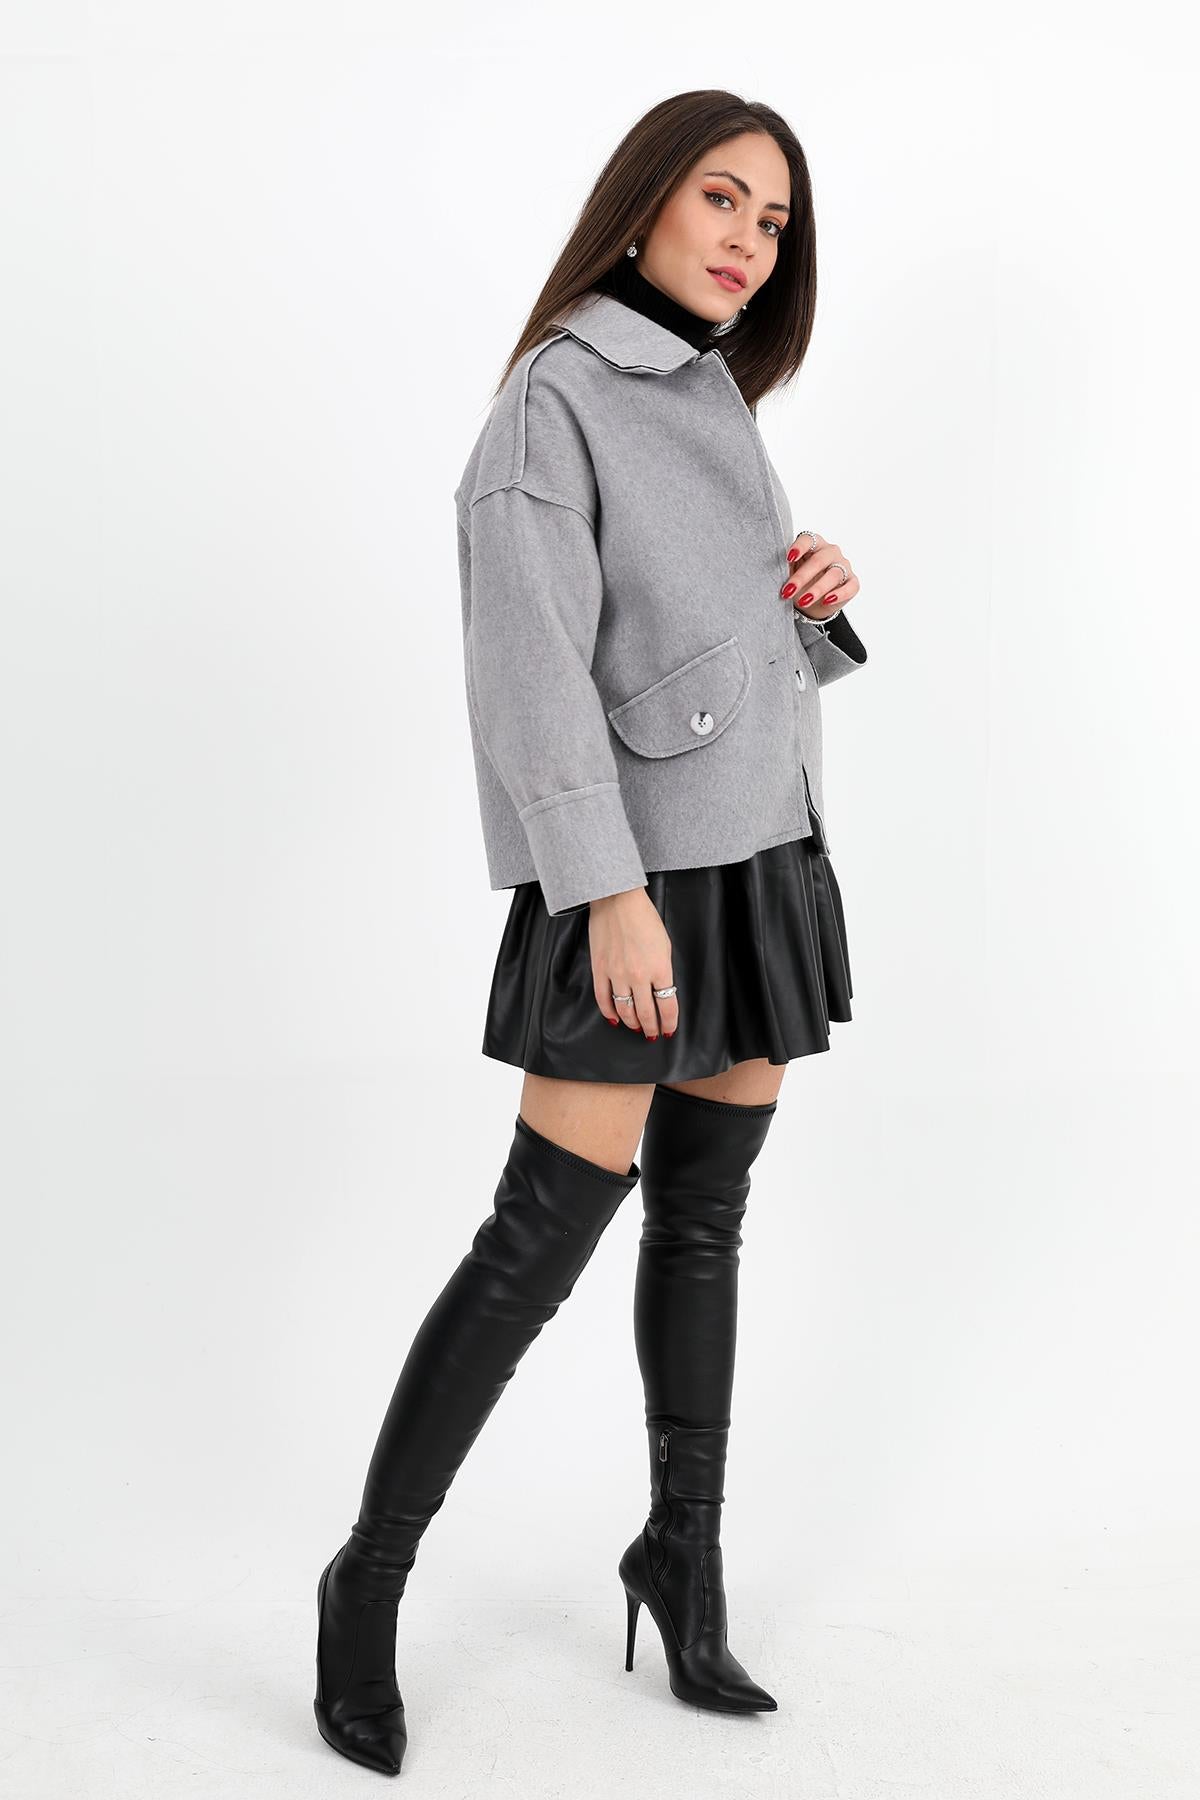 Women's Coat with Pocket Flap Button-Up Short - Gray - STREETMODE™